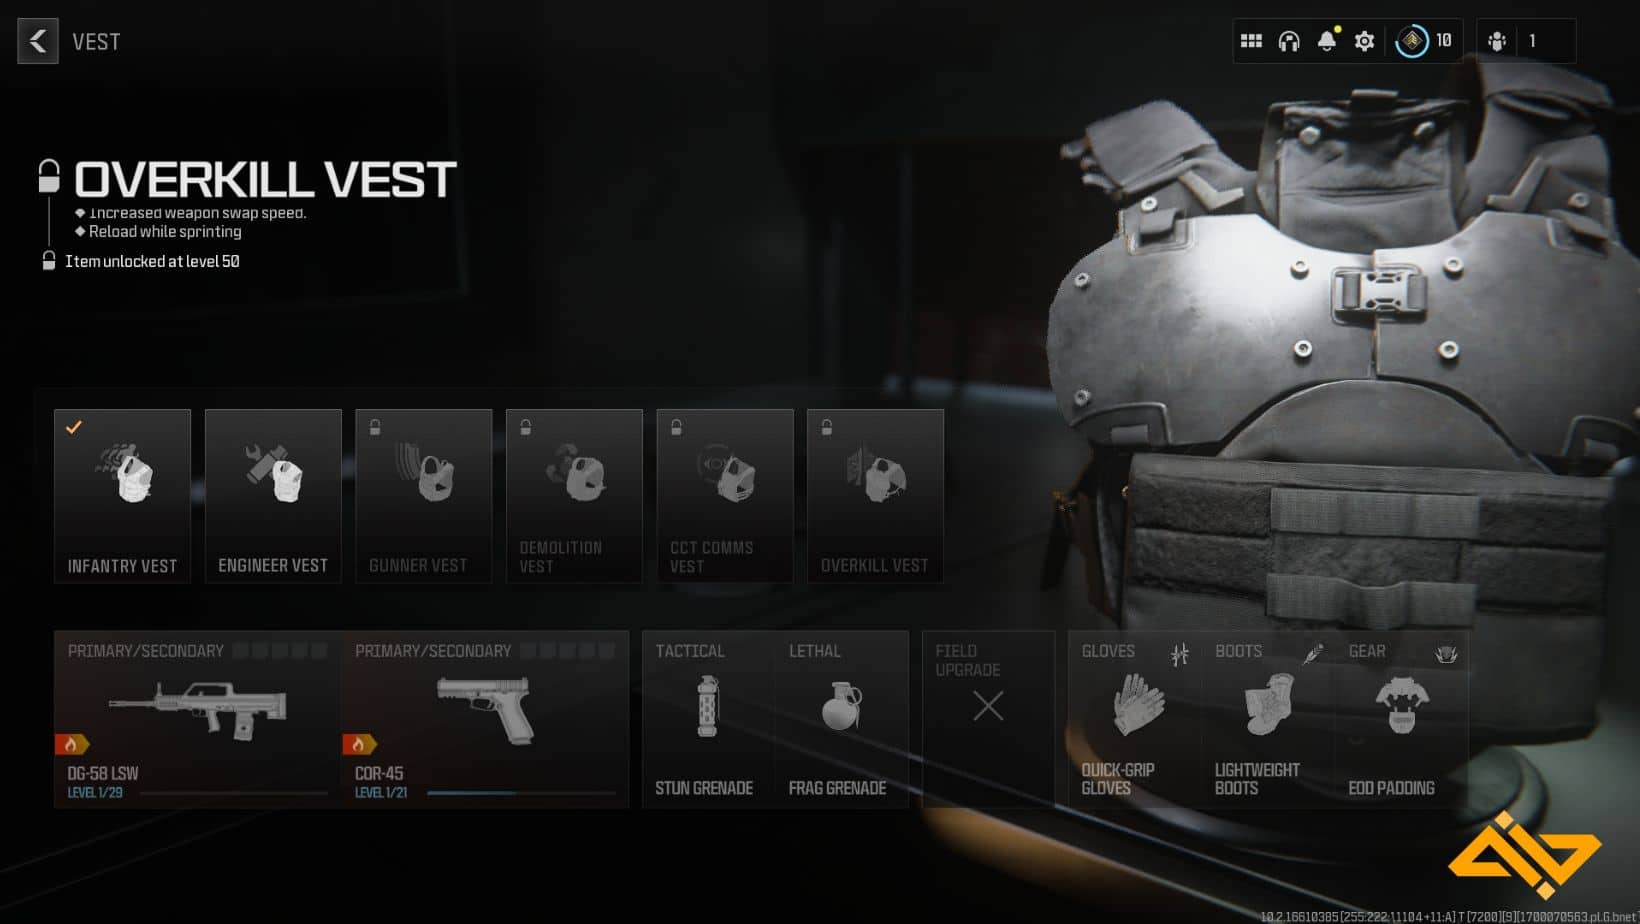 The Overkill Vest allows you to equip two primary weapons.